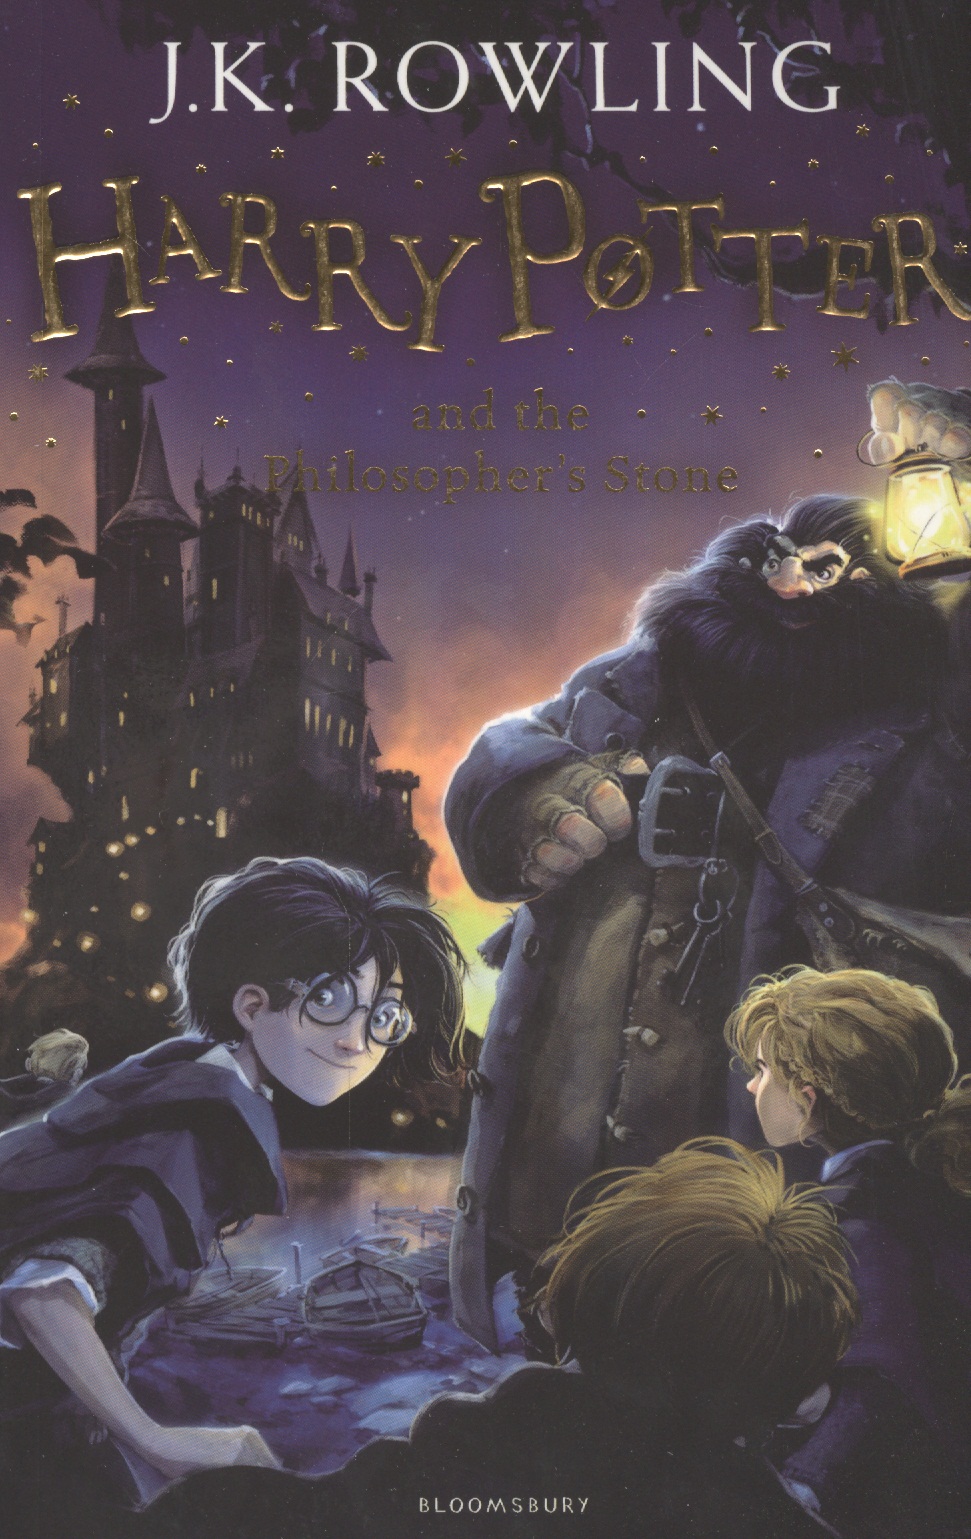 Harry Potter and the Philosophers Stone. (In reading order: 1) набор магнитов harry potter wizardry